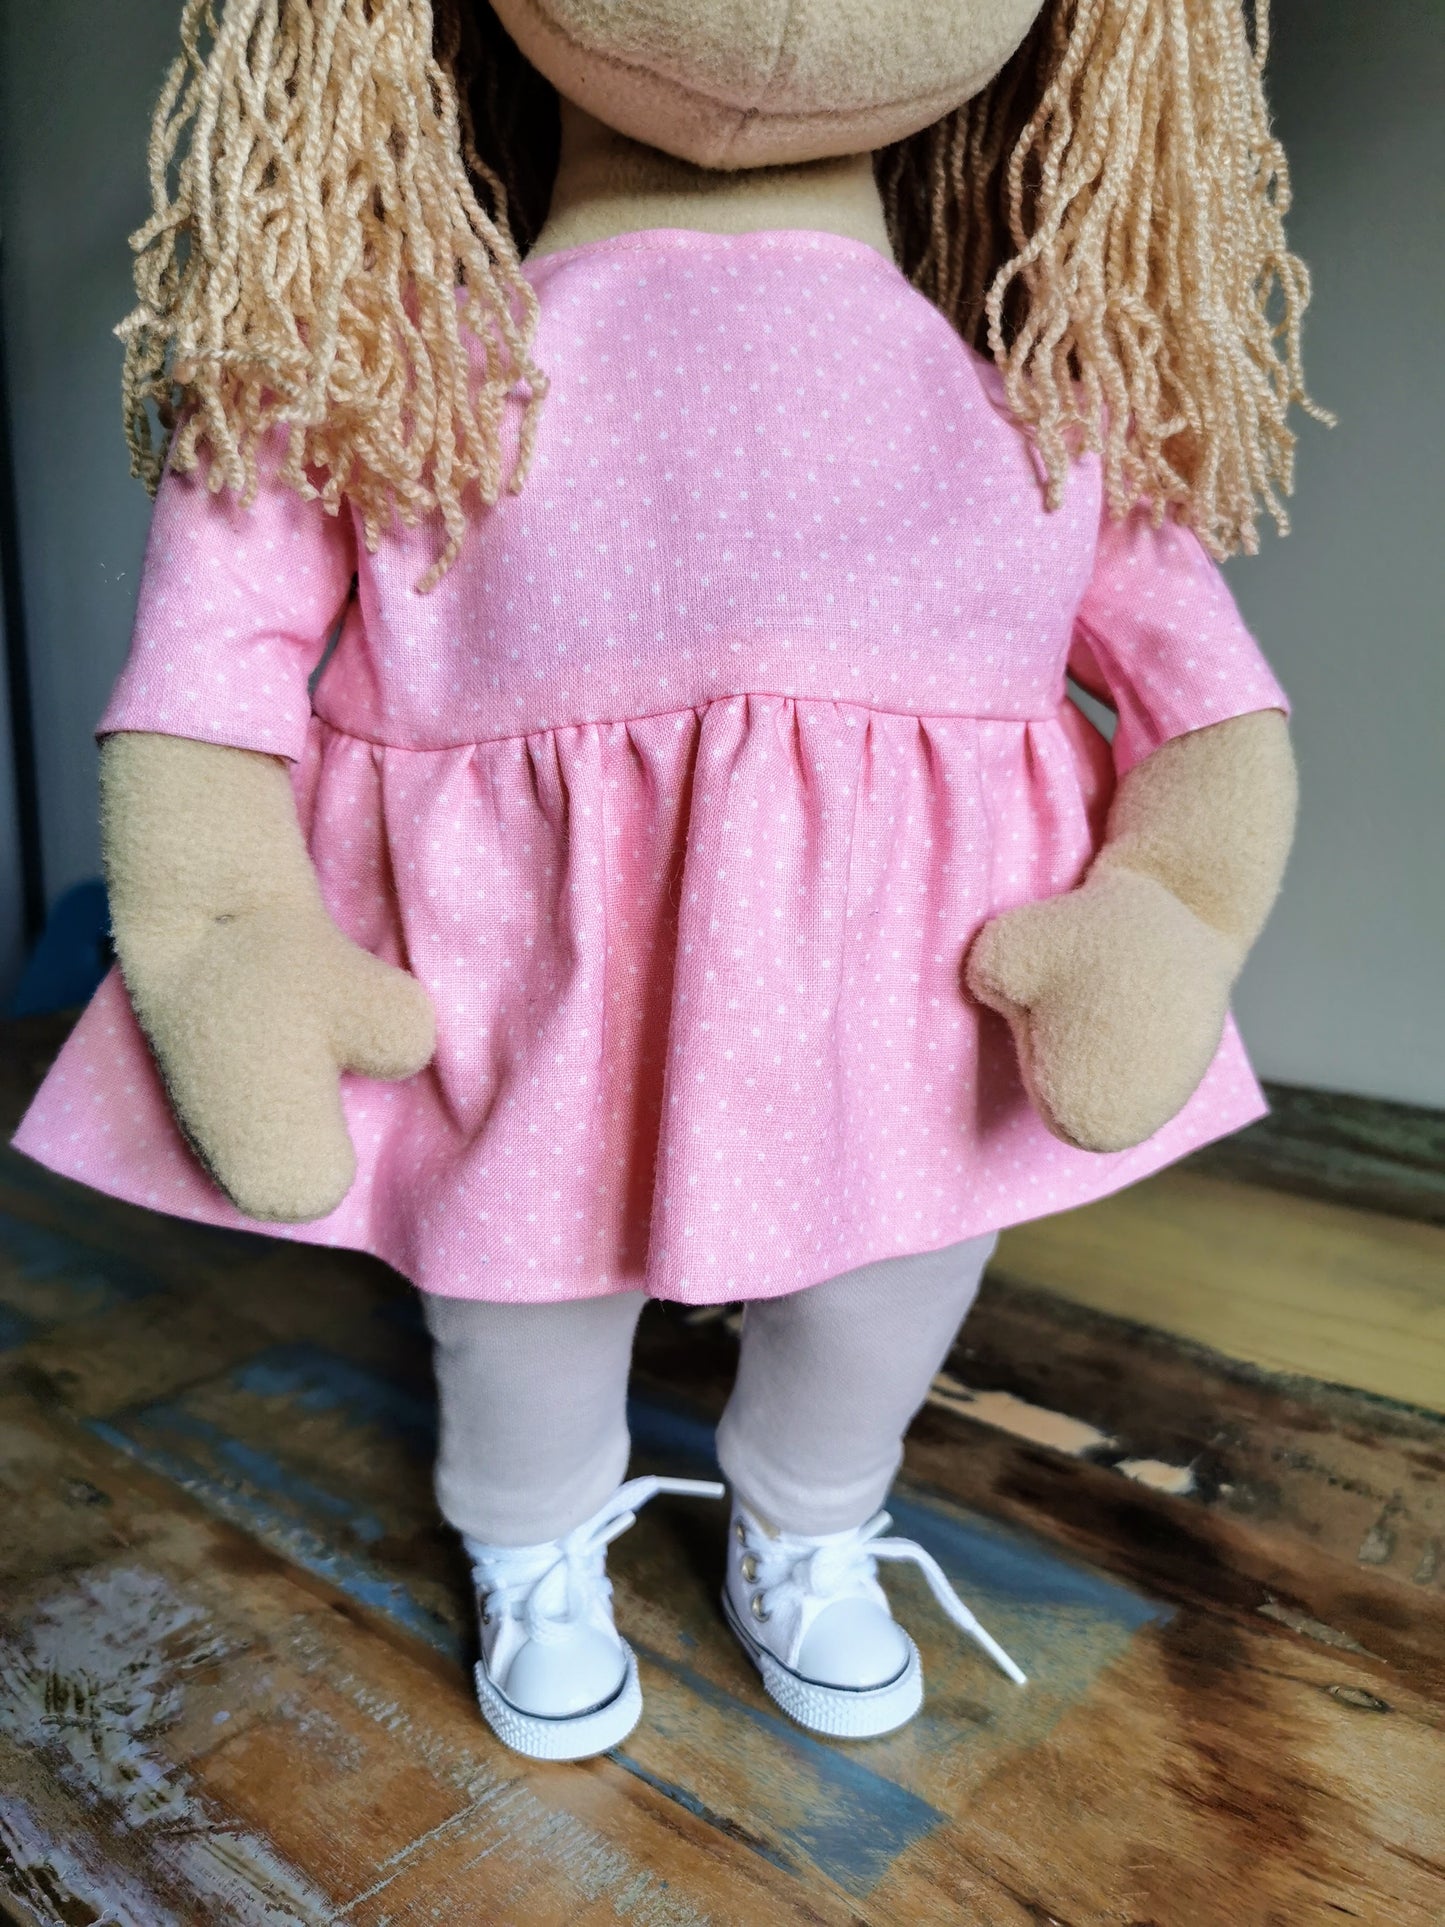 Custom Doll from Photo to Plush, dolls of real girl, replica of famous people, plush doll from photo, figurine mini-me dolls of your family 50 cm